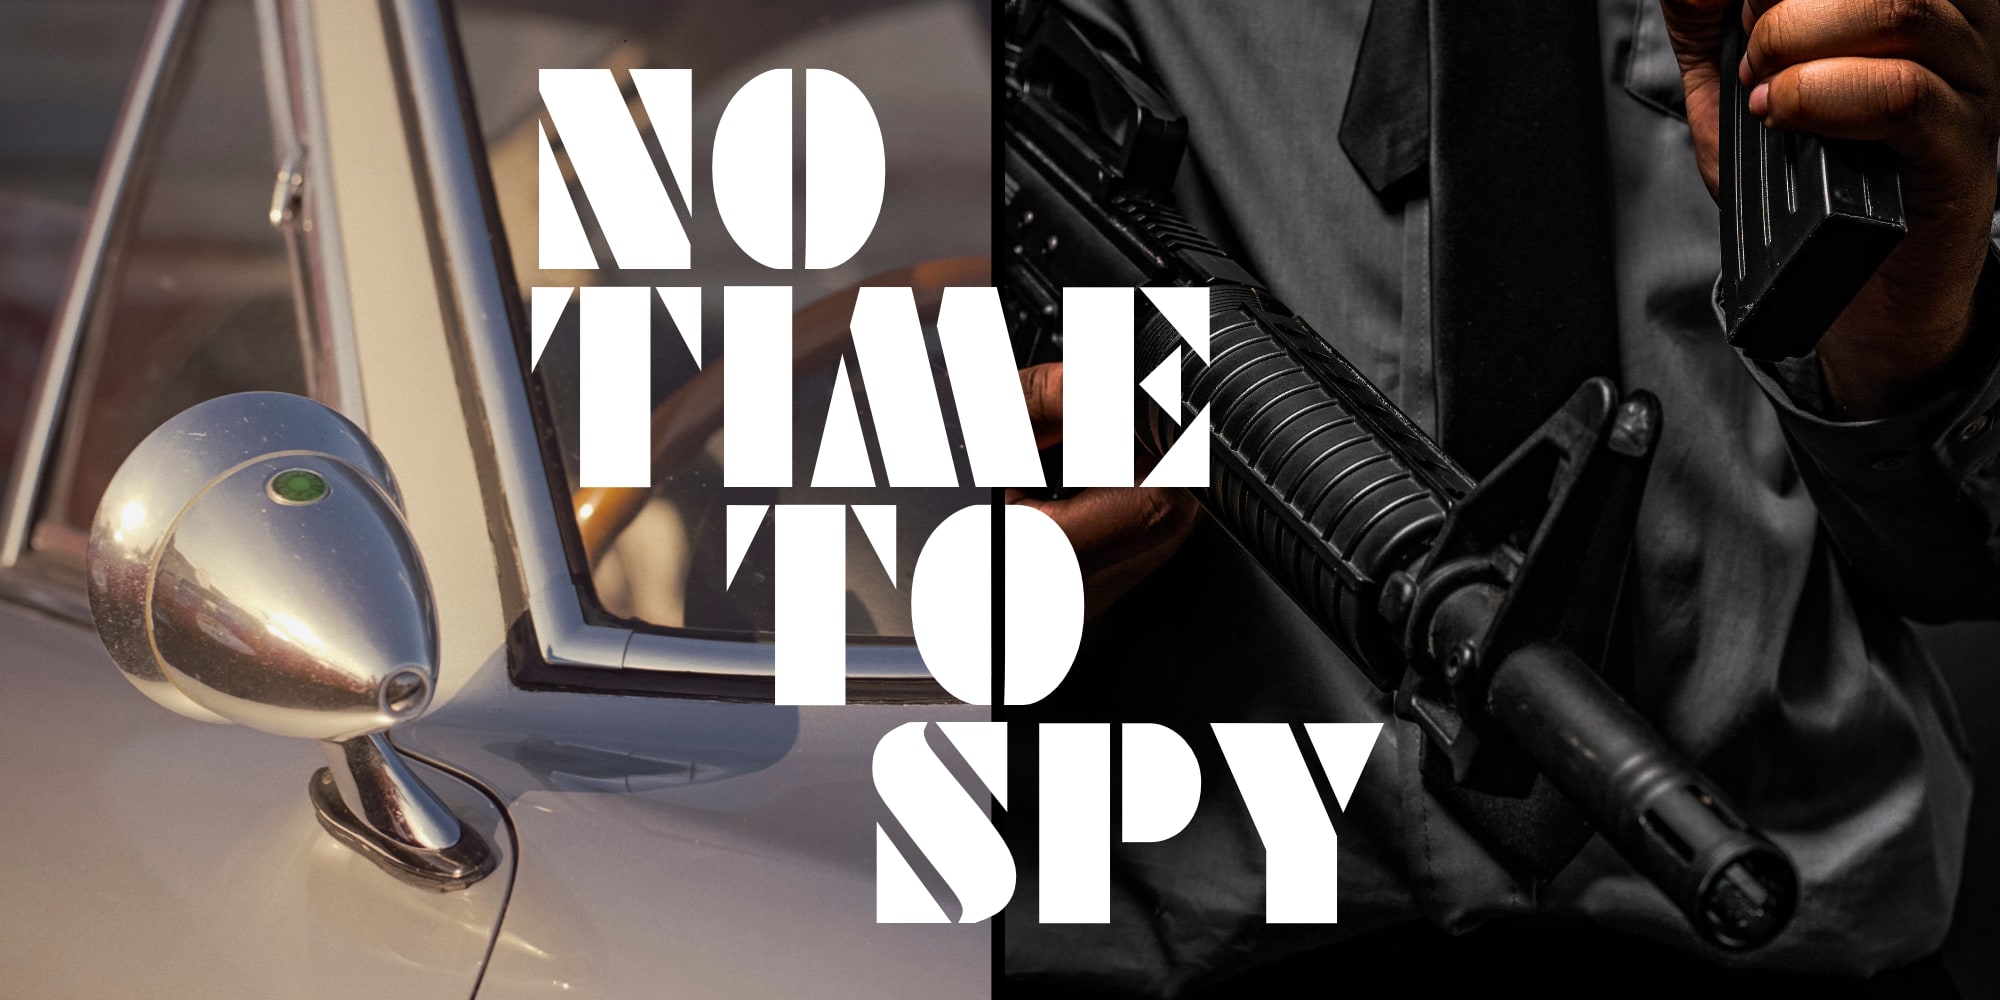 Radio Clash 354: No Time To Spy James Bond Part 2 Music of Bond No Time To Die 25th Film covers mashups remixes hiphop downtempo ambient chilled